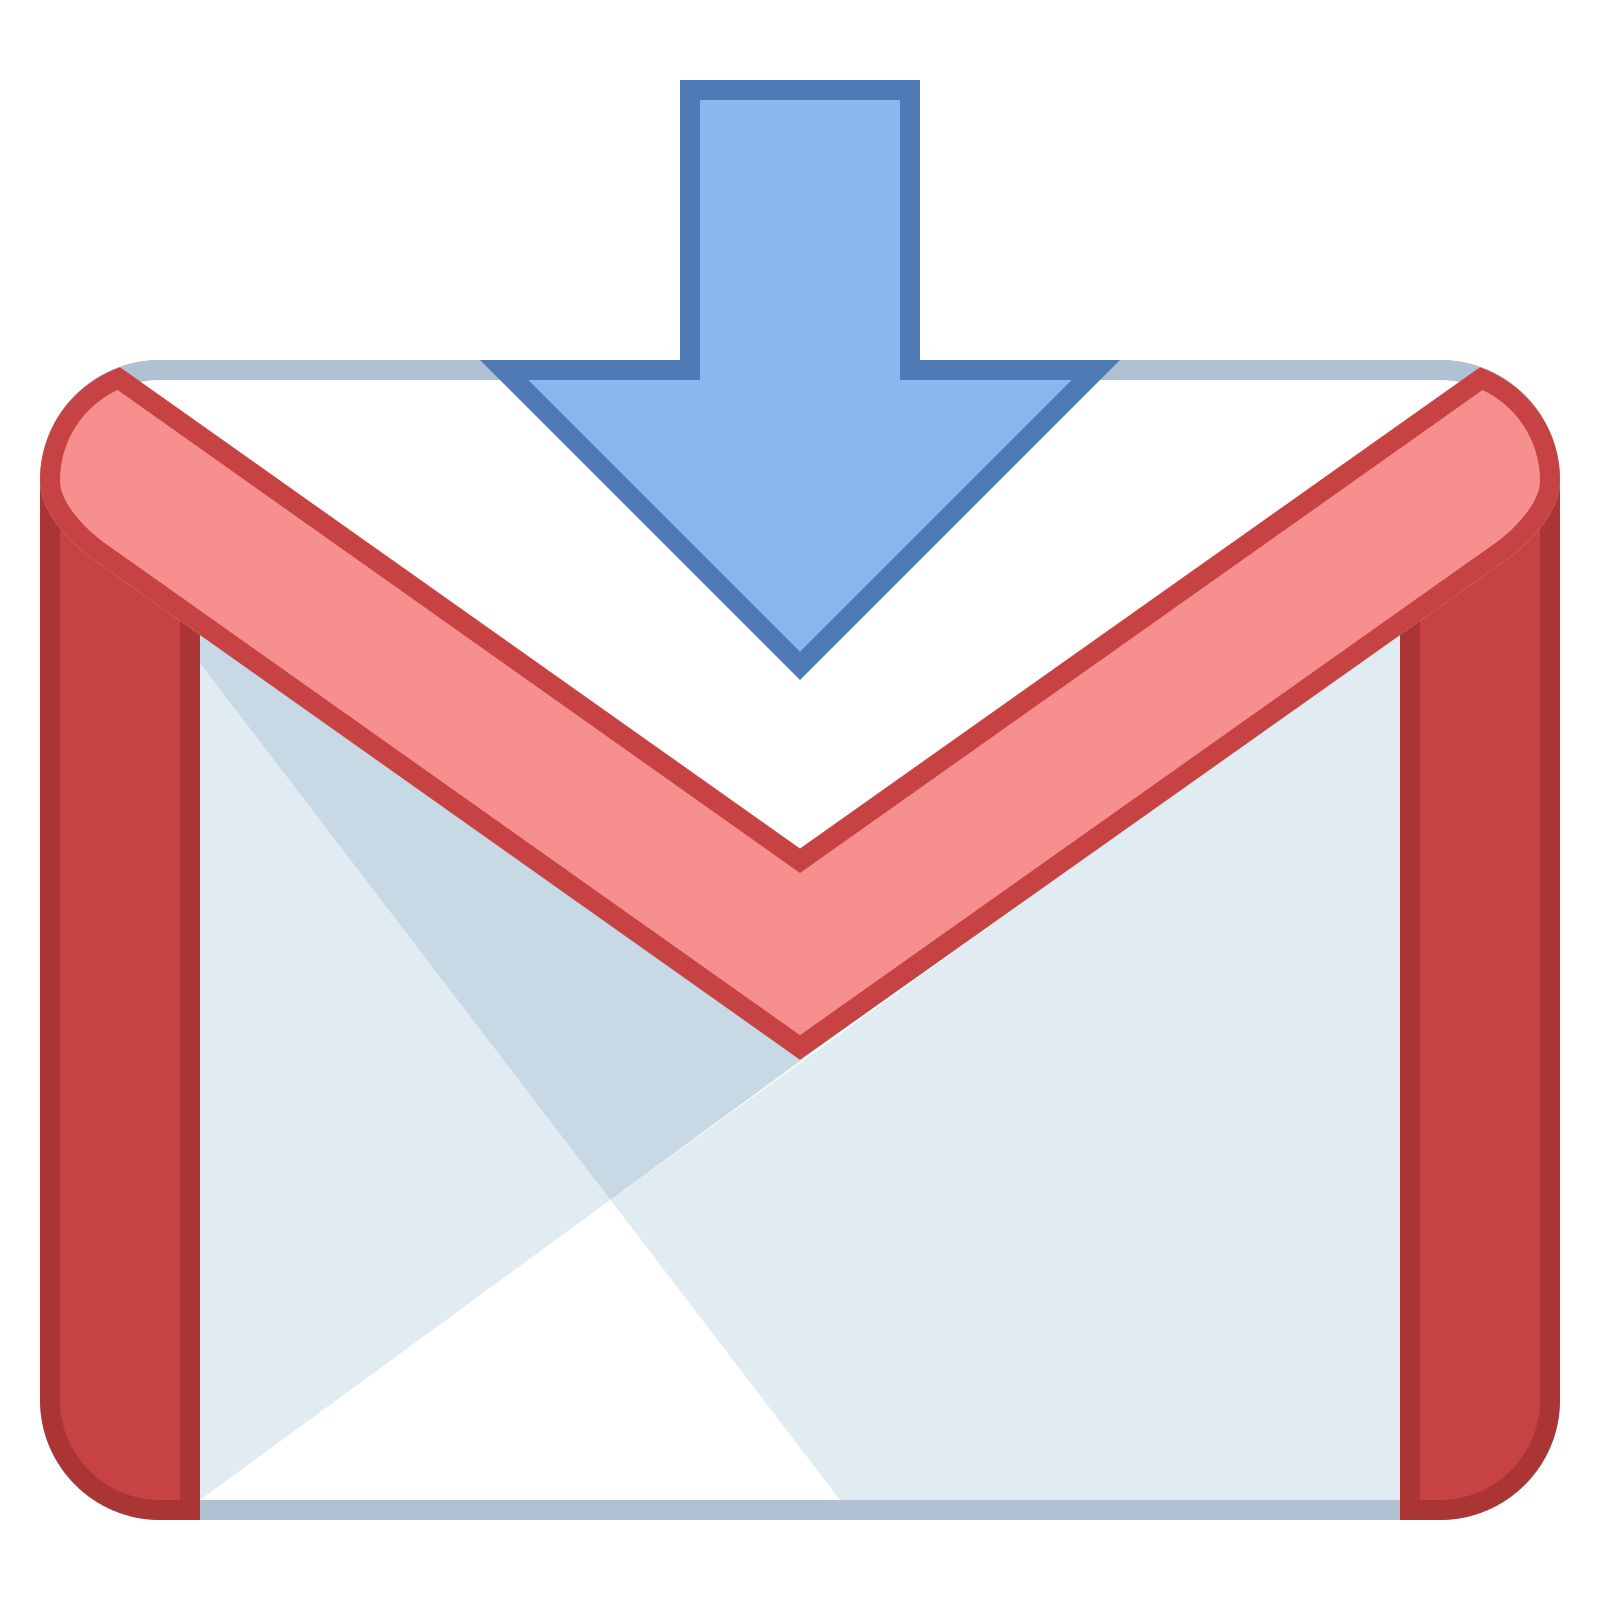 download gmail icon on my desktop